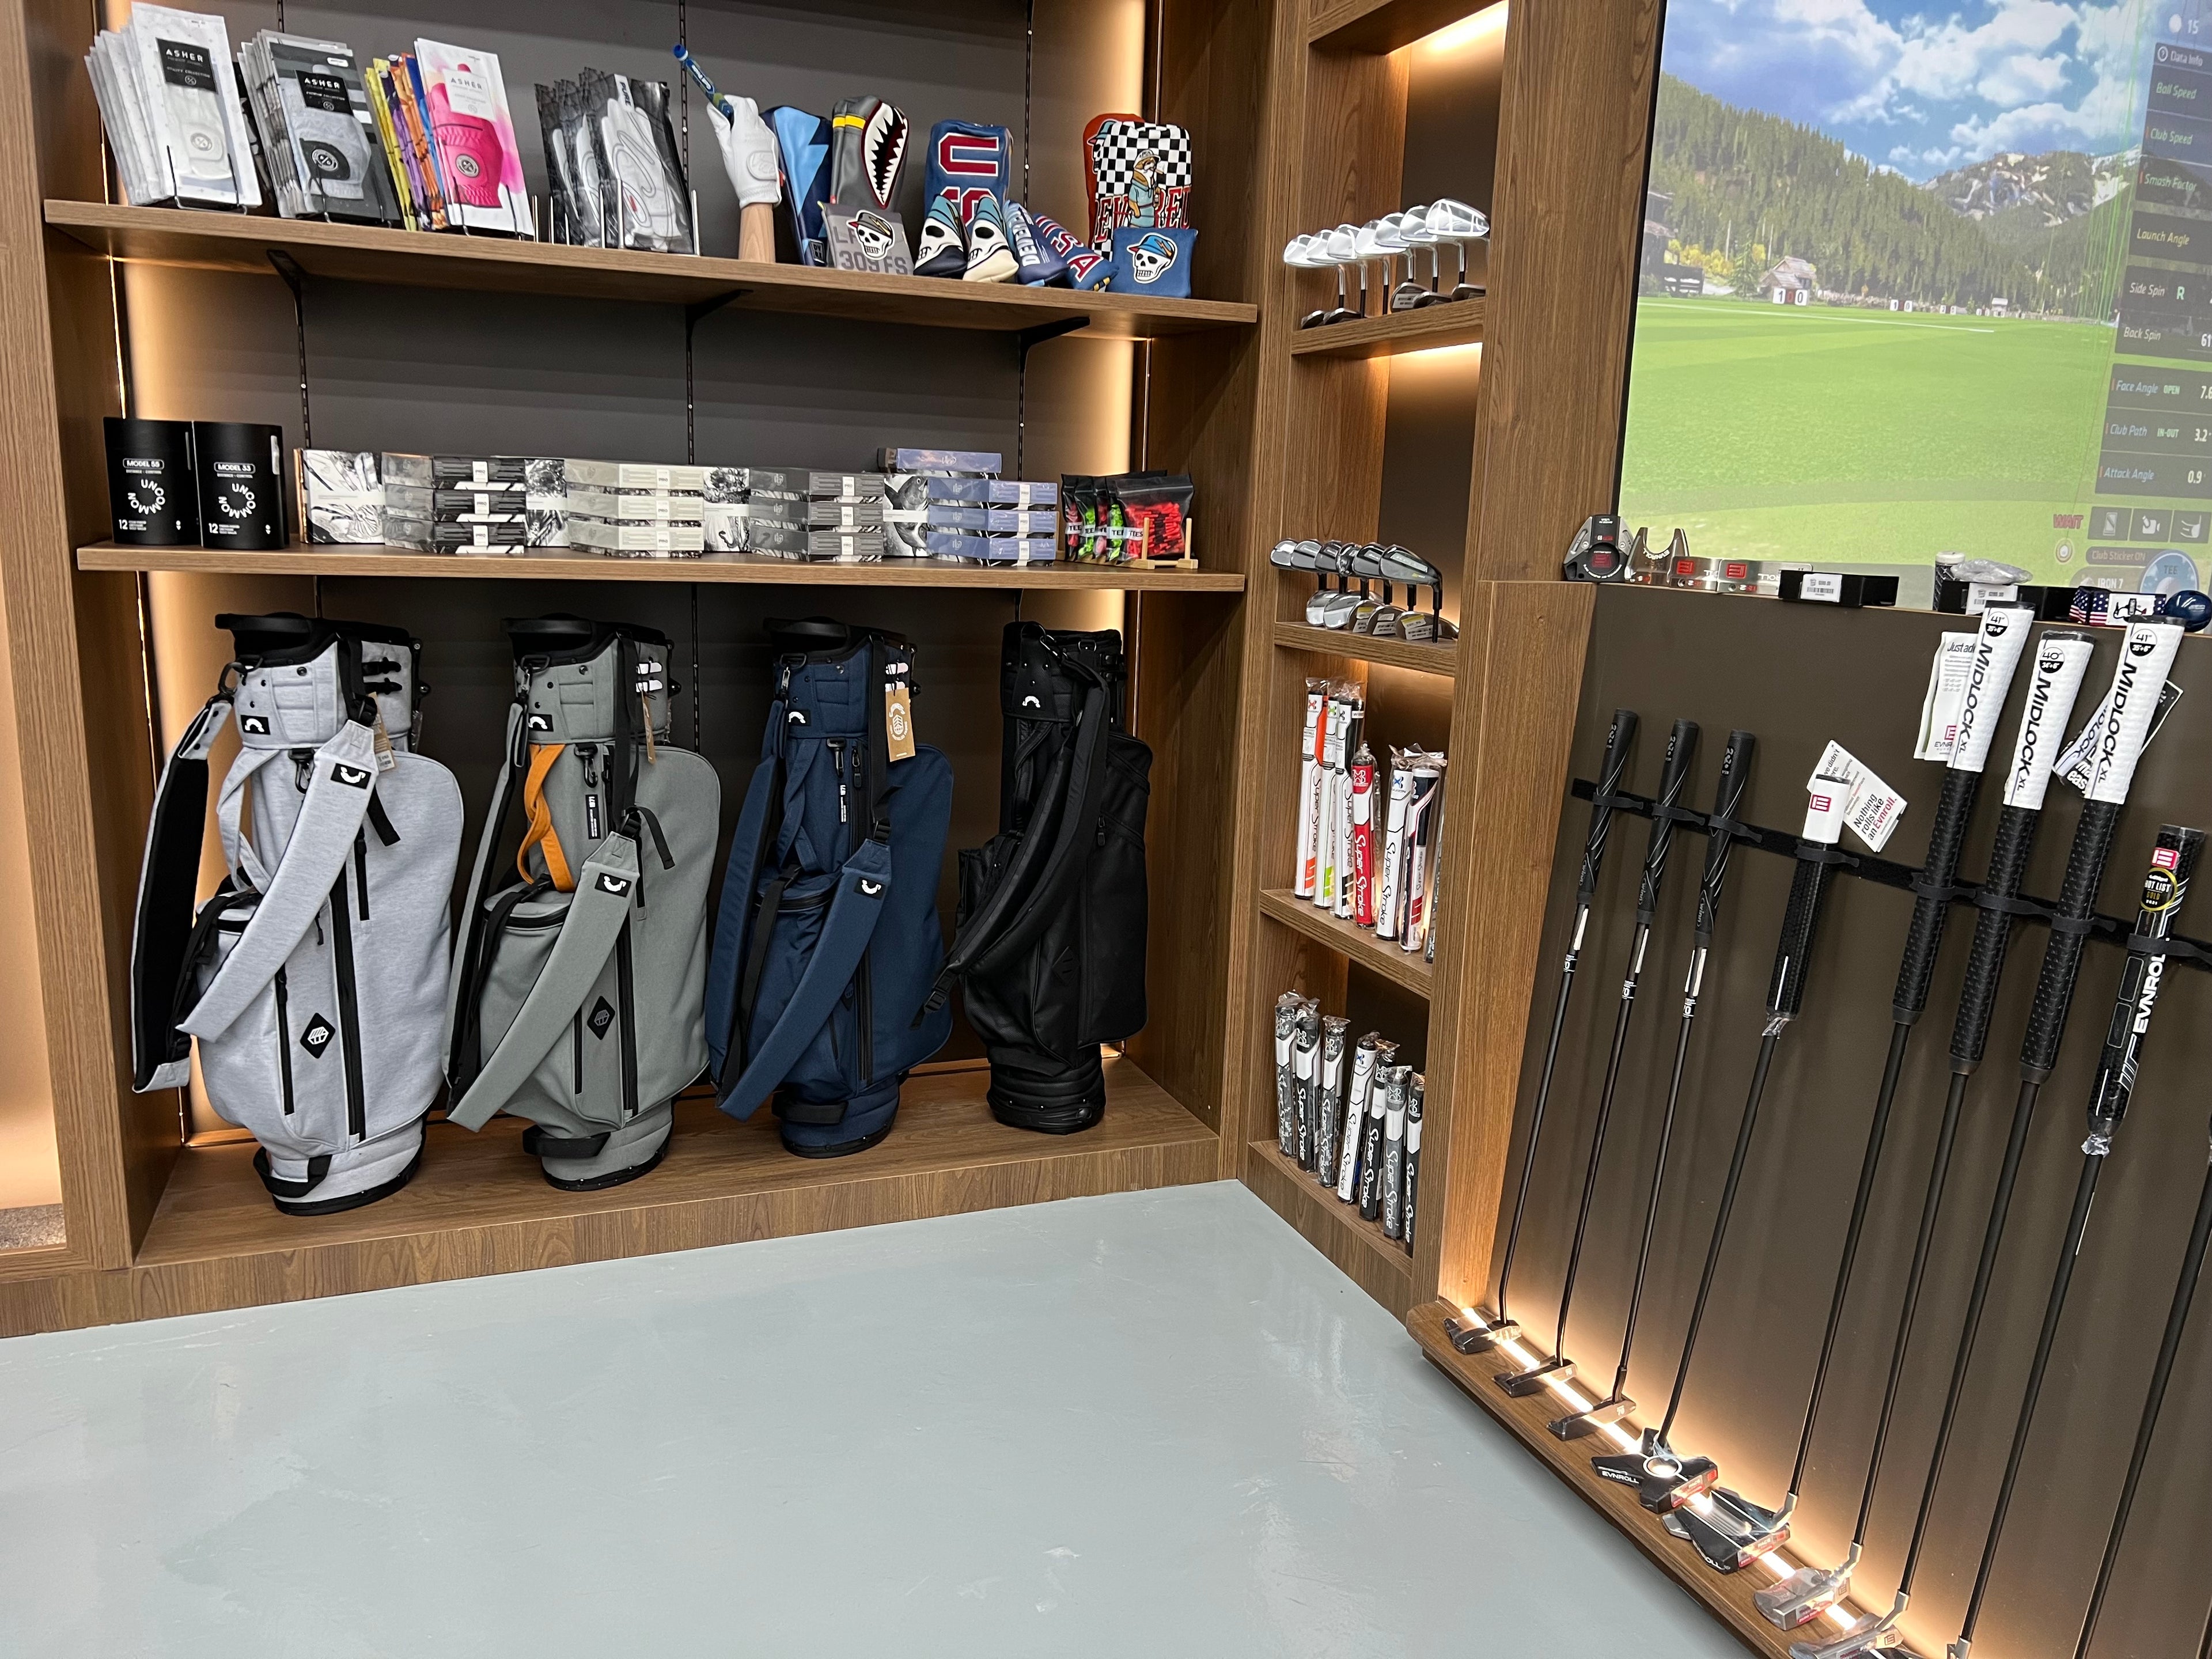 Image of a golf pro shop offering a wide range of high-quality equipment and accessories, such as golf clubs, putters, grips, golf bags, golf balls, gloves, and more.